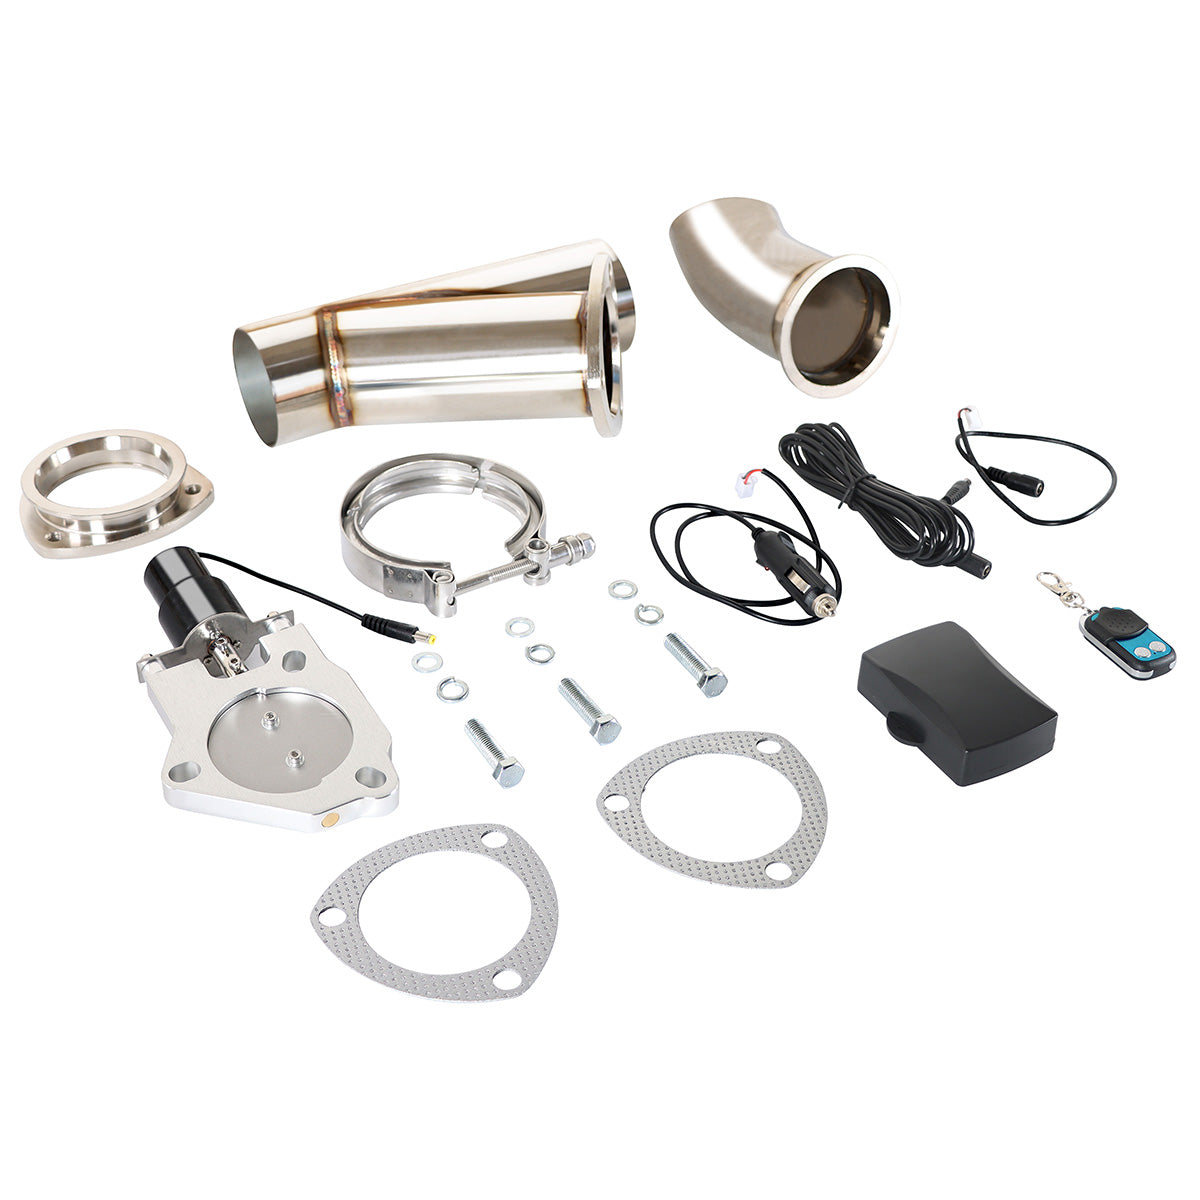 1 Set Remote Electric Exhaust Cutout Kit 3 Inch/3.0"